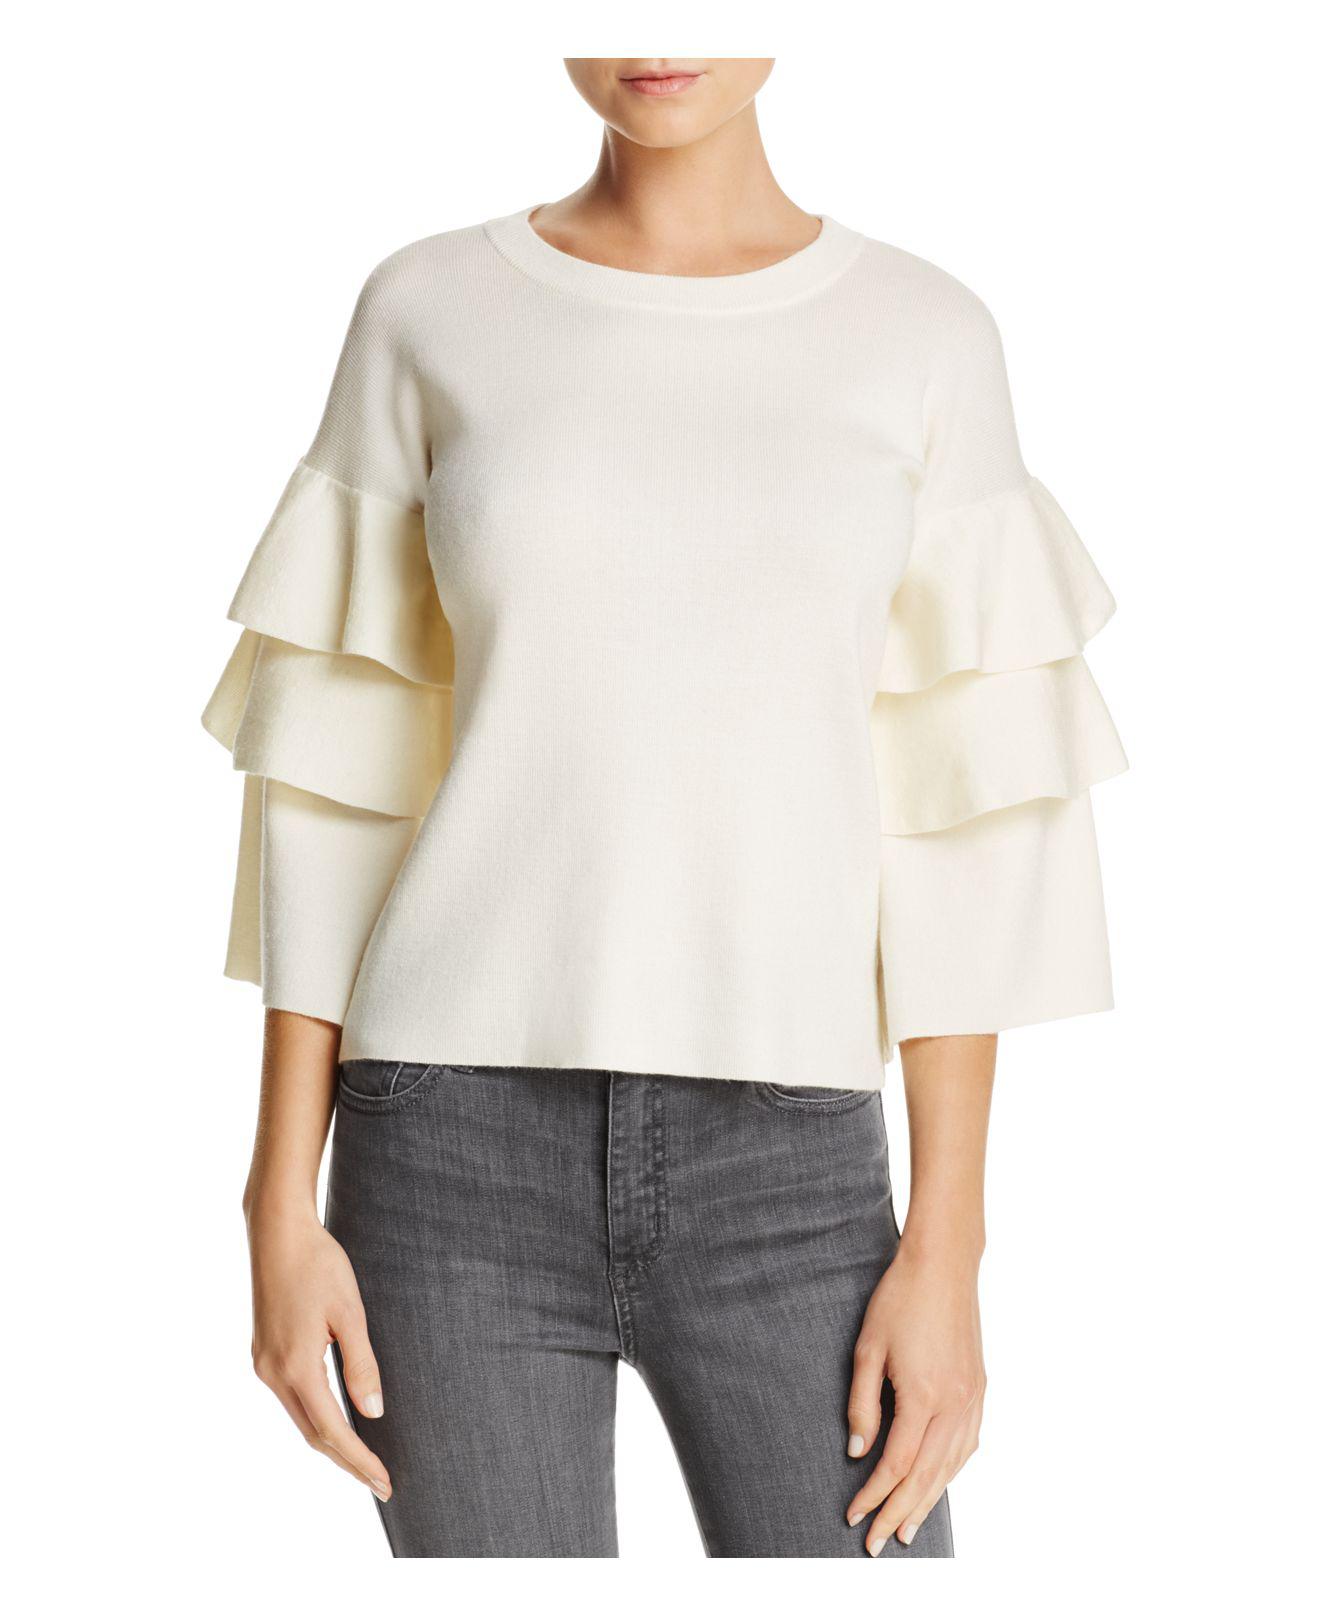 Lyst - Aqua Tiered Sleeve Sweater in White